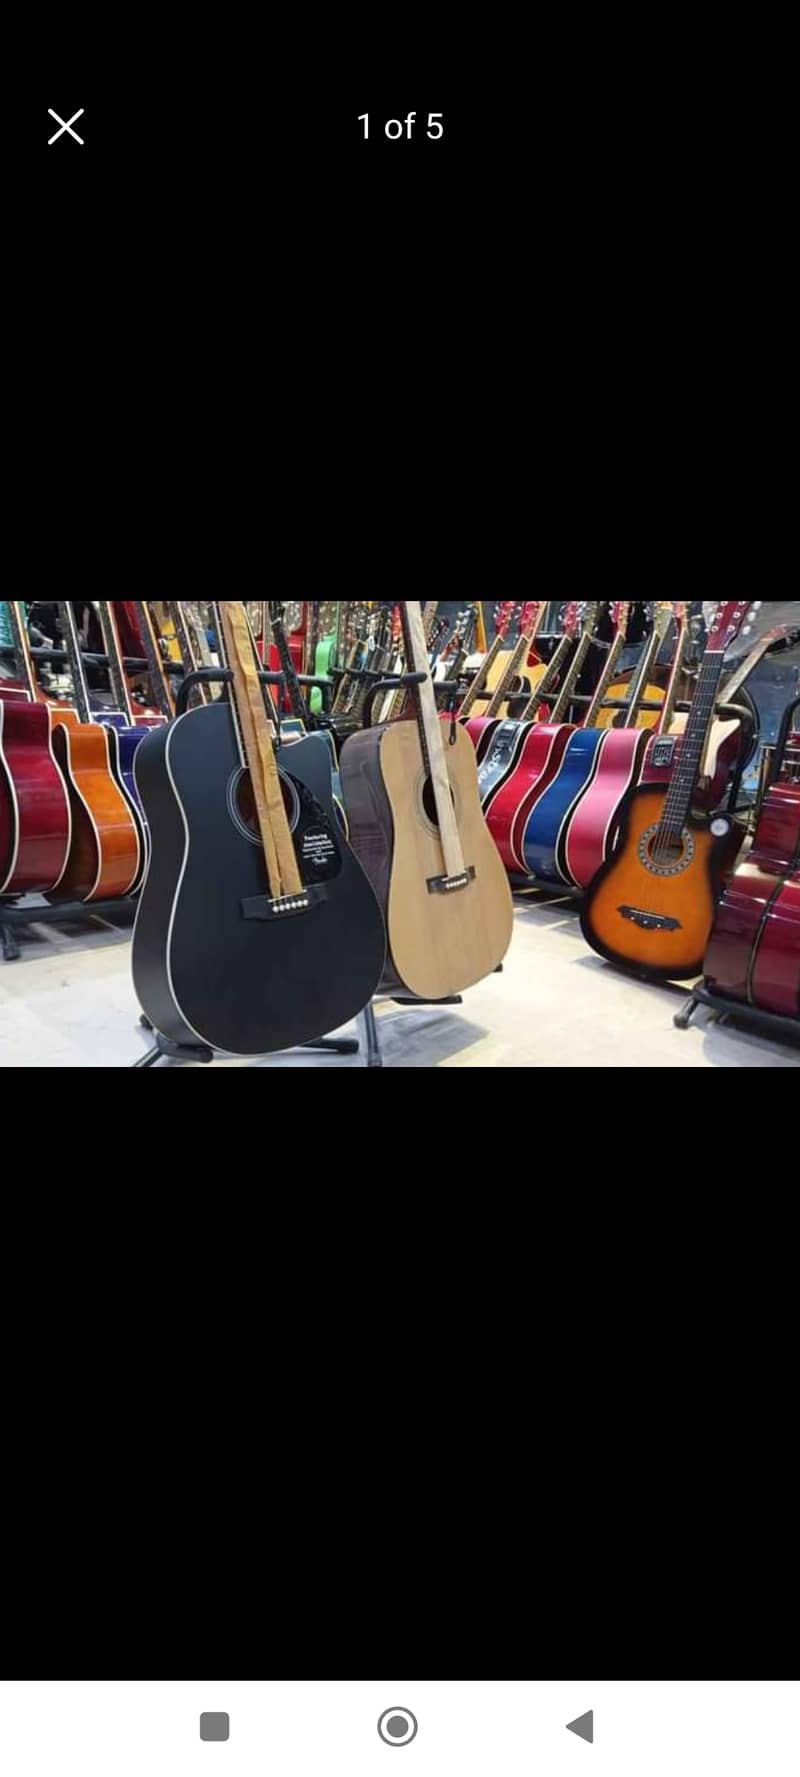 Quality guitars collection at Acoustica guitar shop 8